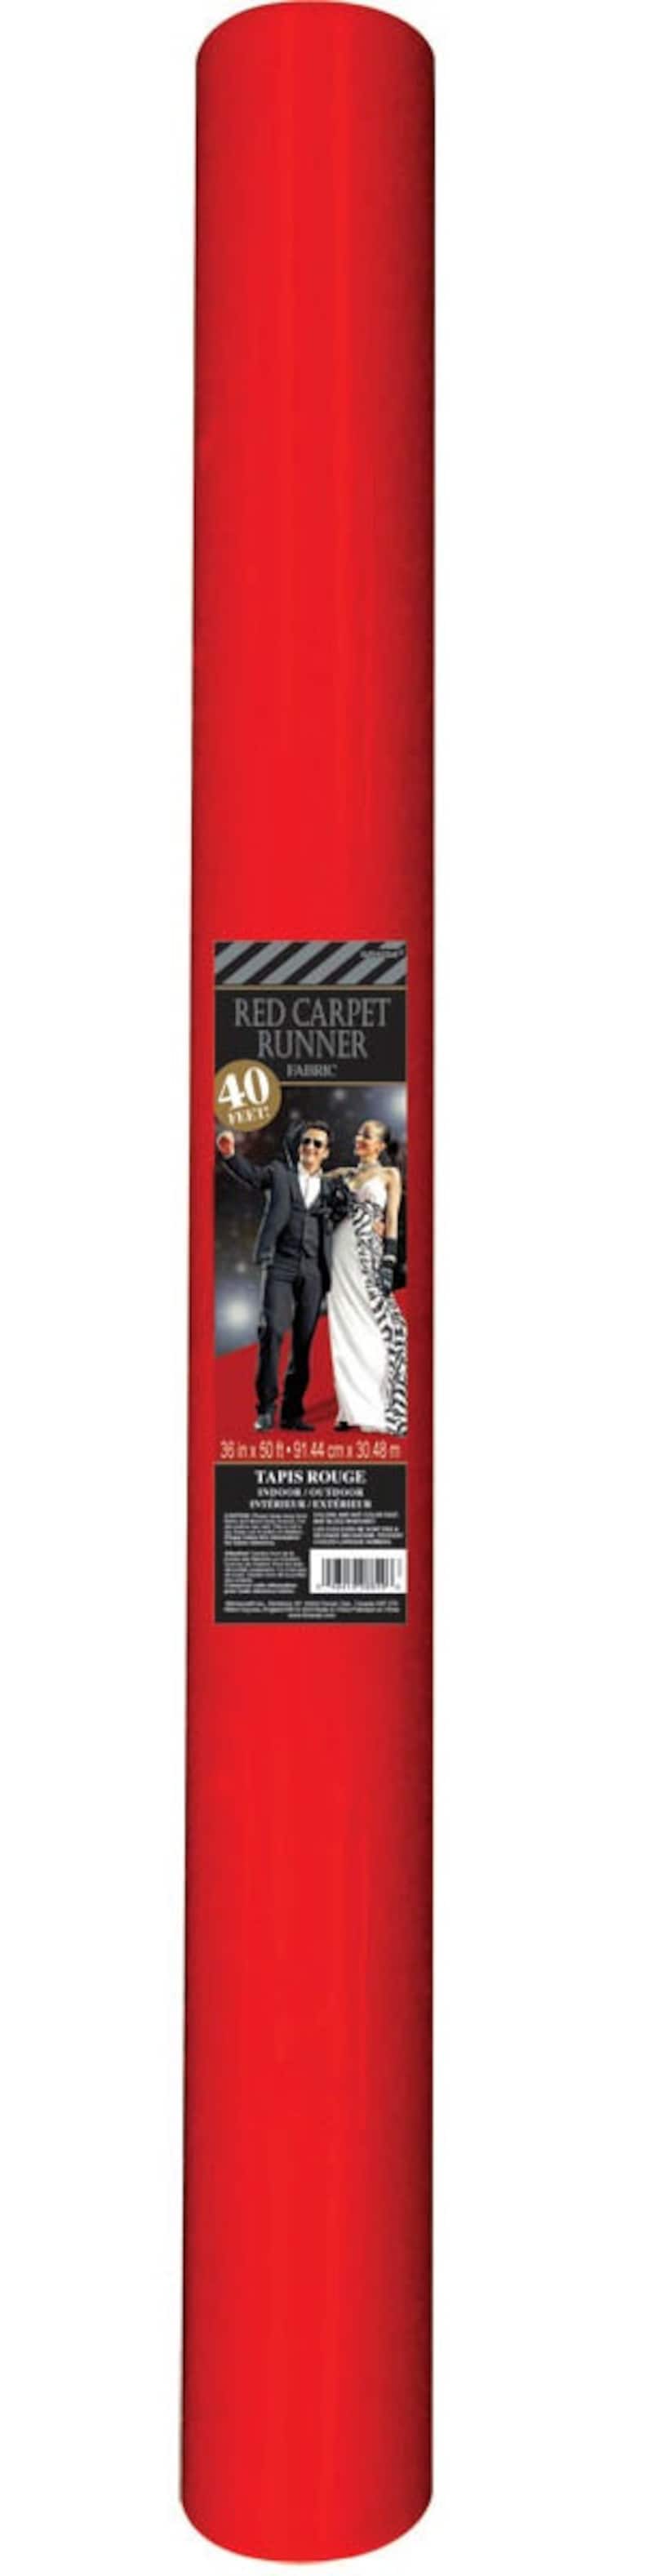 DELUXE Red Aisle Runner/ Hollywood Party/ Oscar Ceremony Party/ Red Floor Runner/ Red Carpet image 2